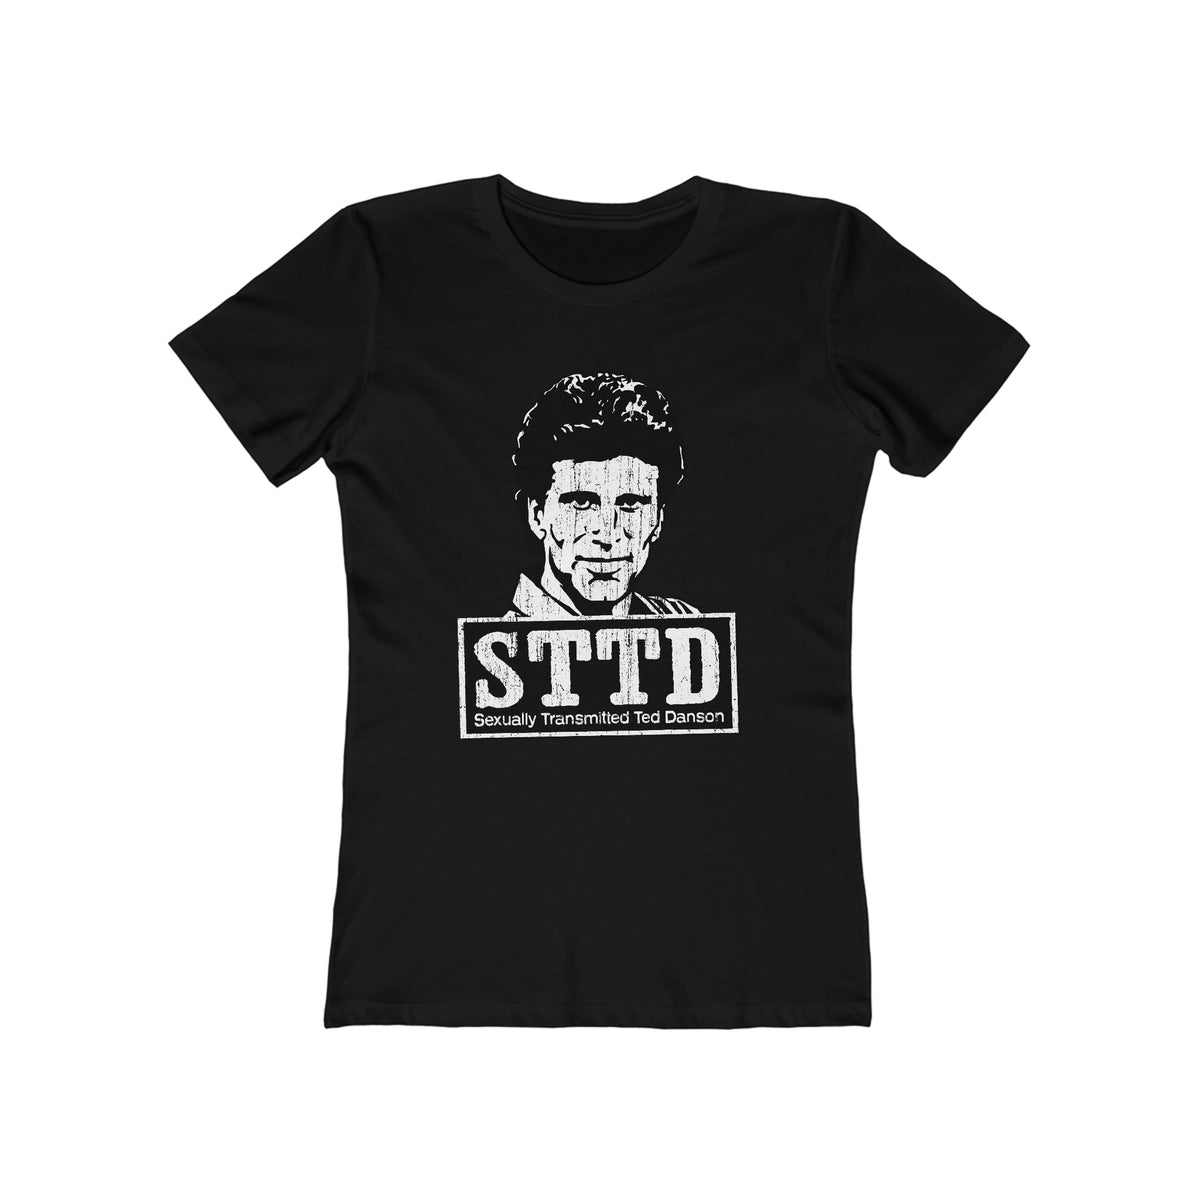 Sttd - Sexually Transmitted Ted Danson - Women’s T-Shirt